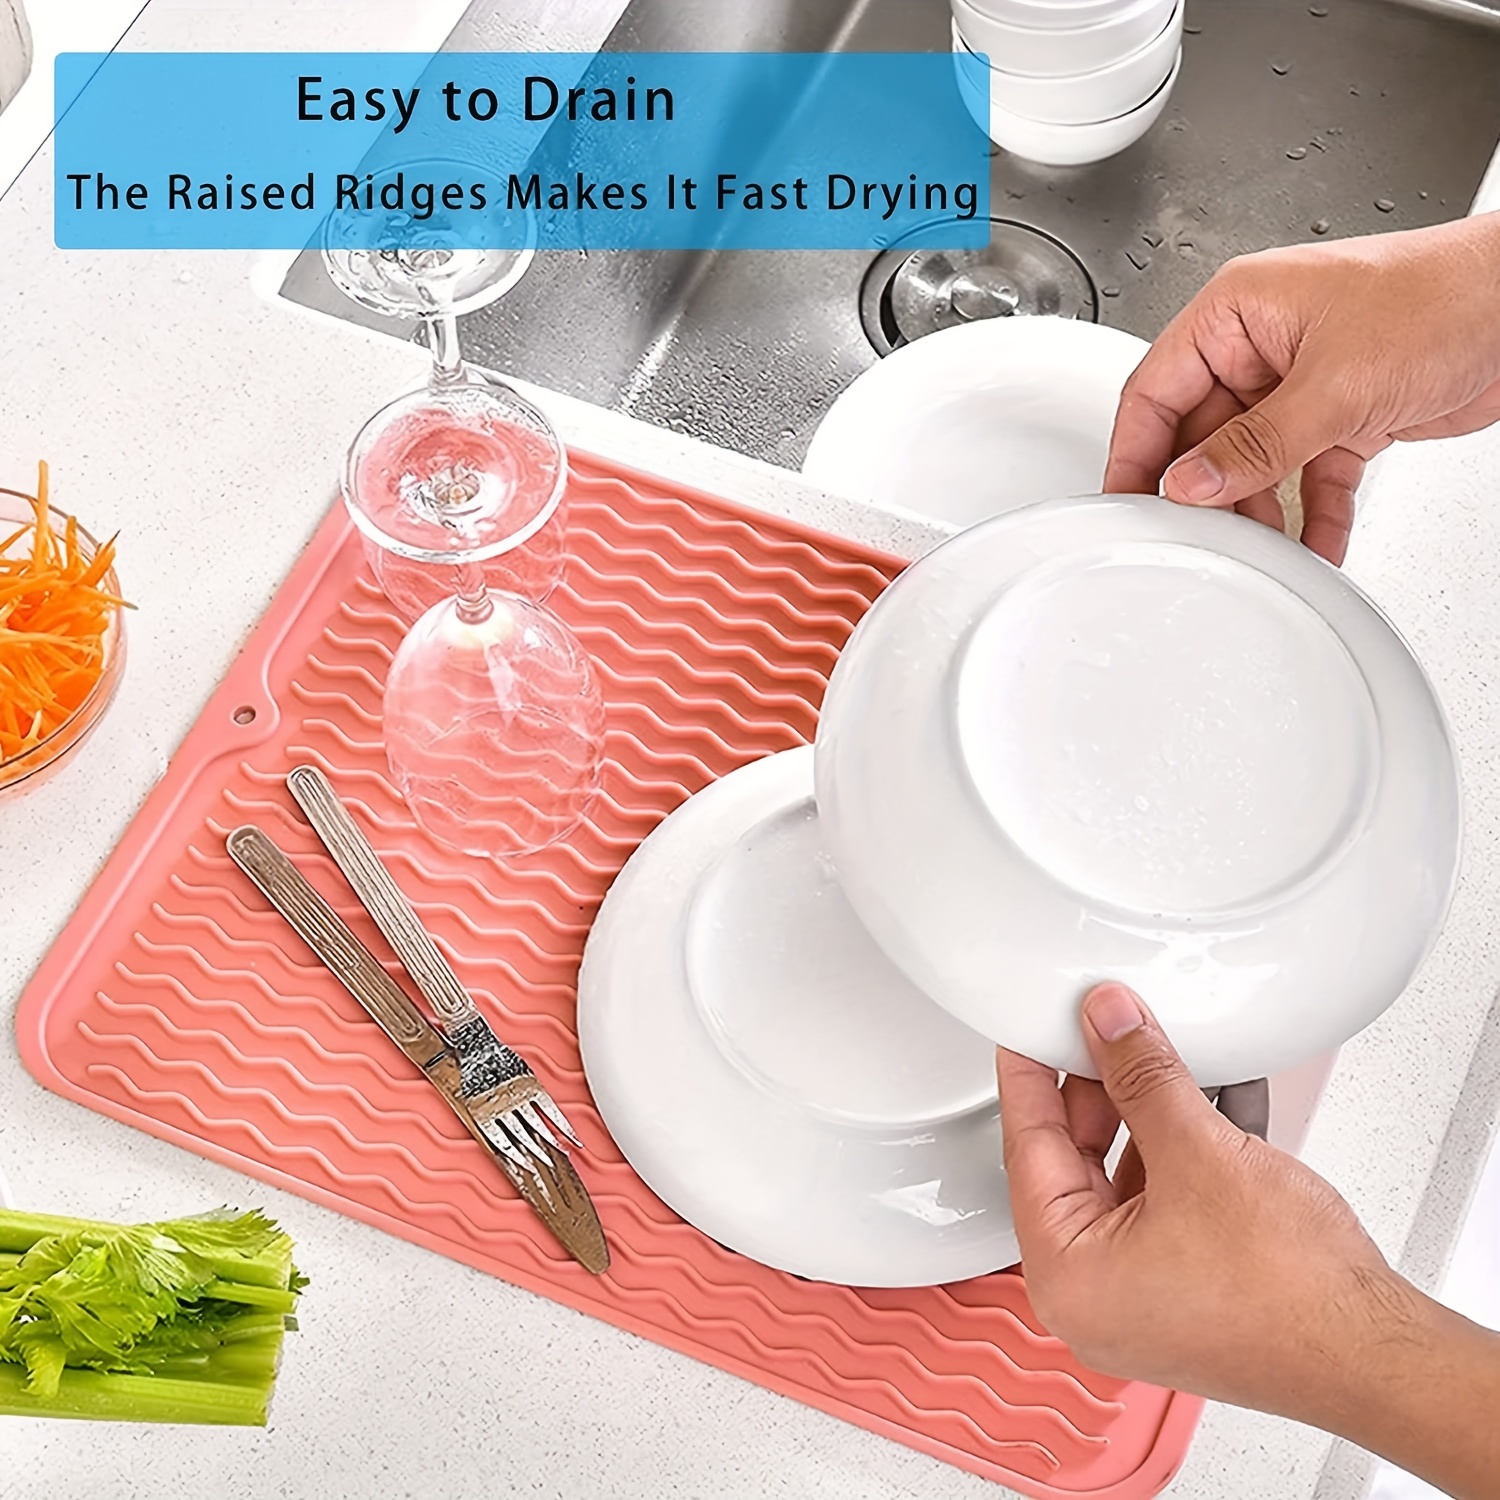 To encounter Silicone Dish Drying Mat -Large 17 x 13 - Set of 2